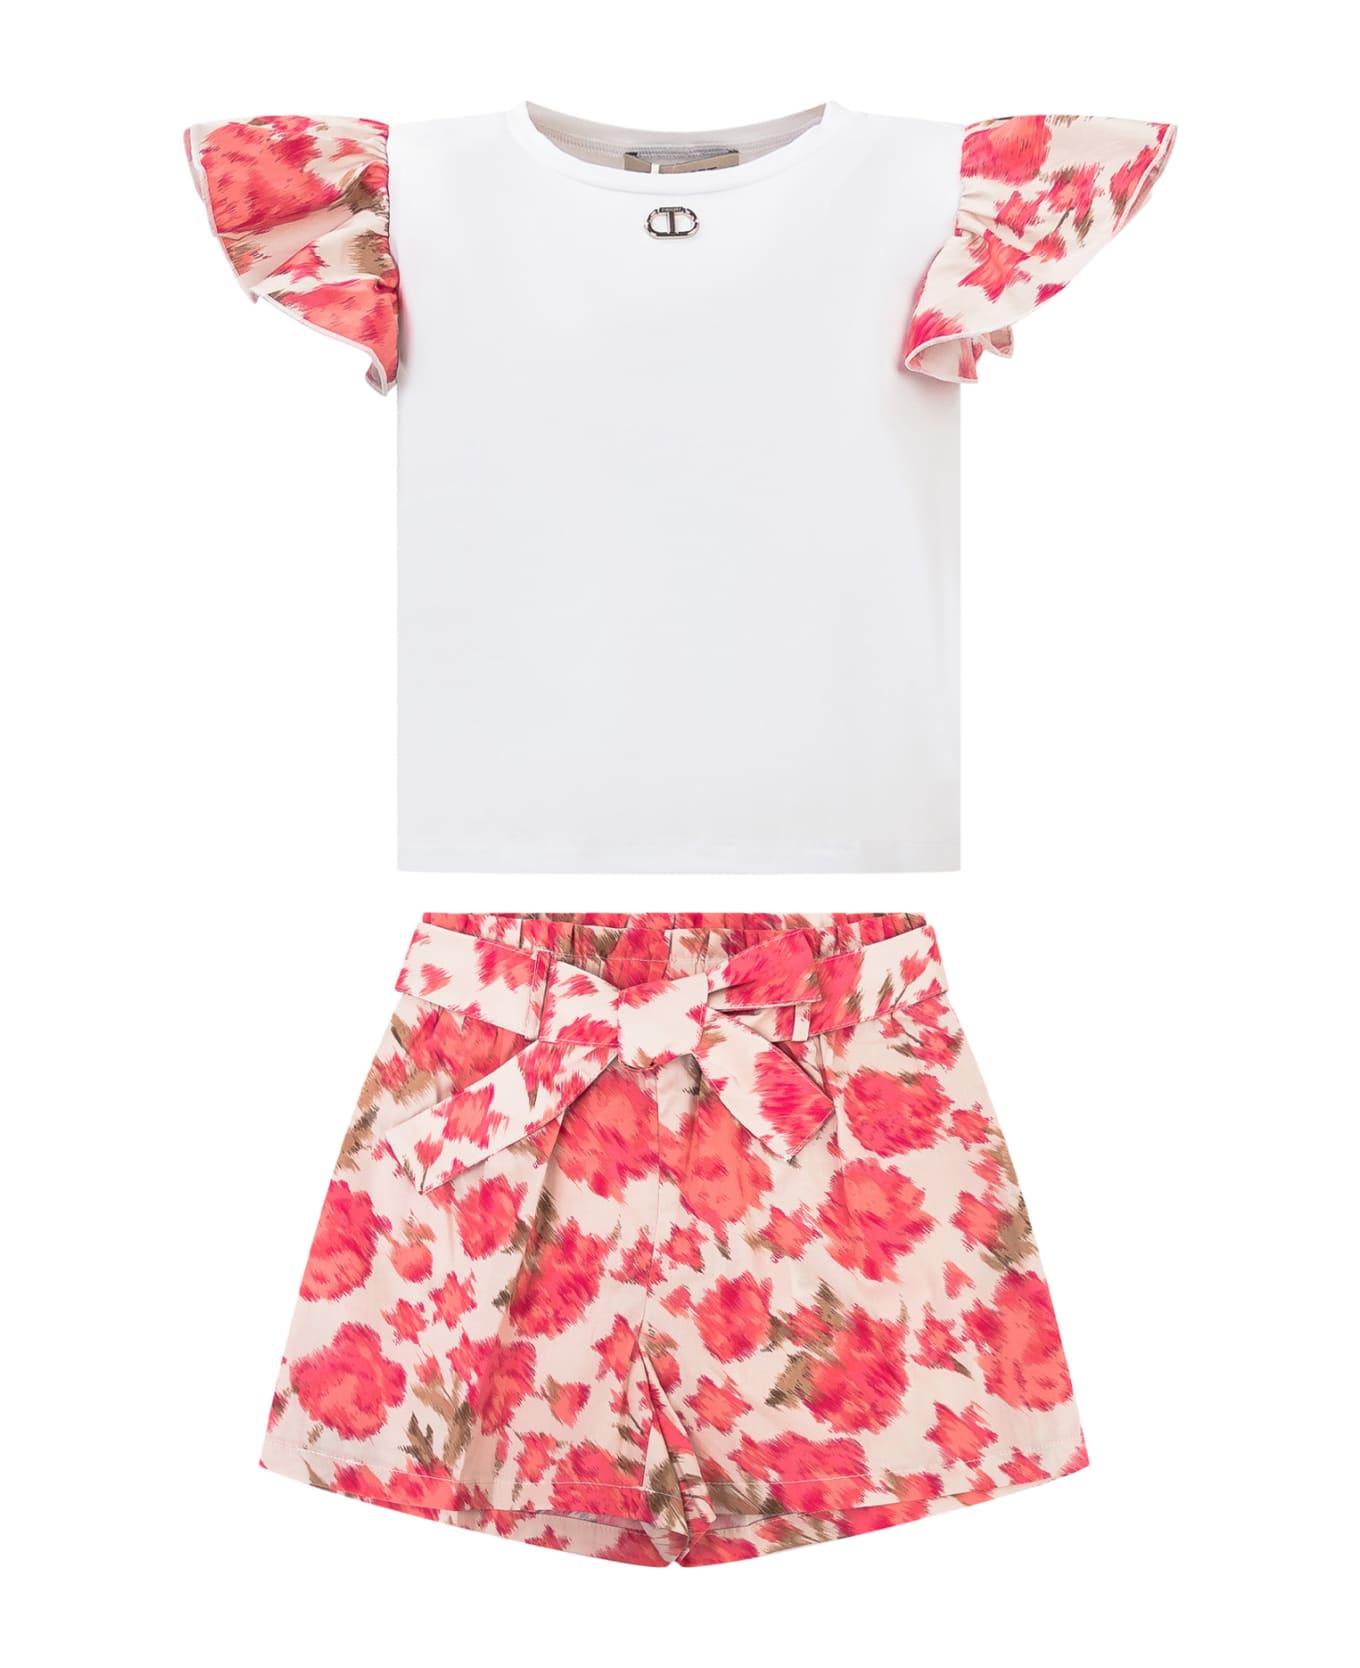 TwinSet T-shirt And Shorts Set - FIORI CAMELIE ROSE ジャンプスーツ